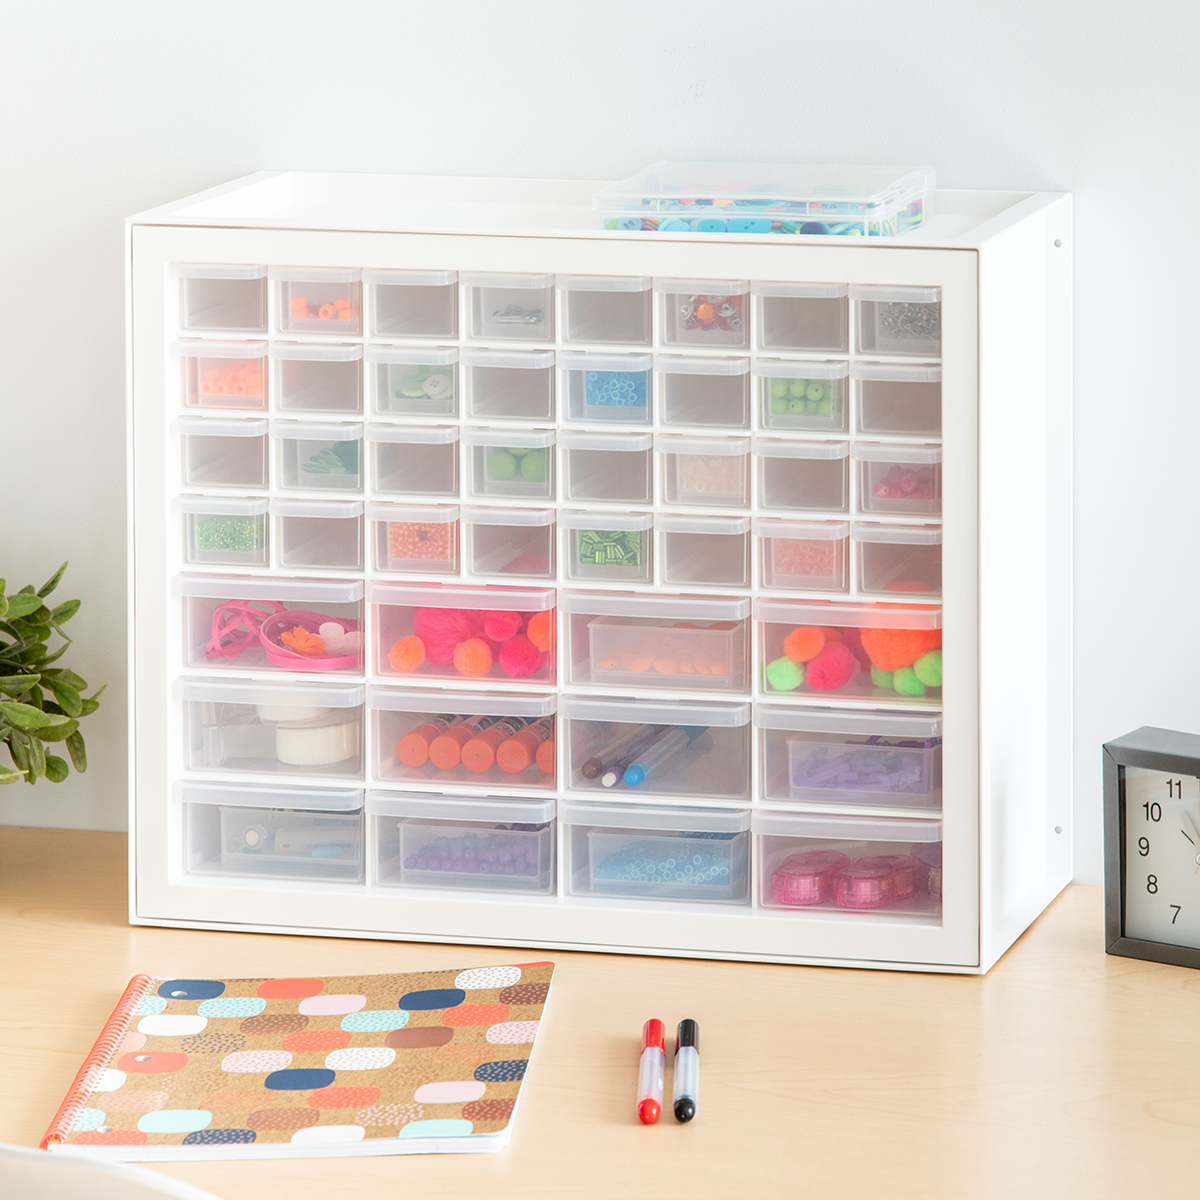 https://www.containerstore.com/catalogimages/354300/10075193-44-Drawer-Cabinet-VEN5.jpg